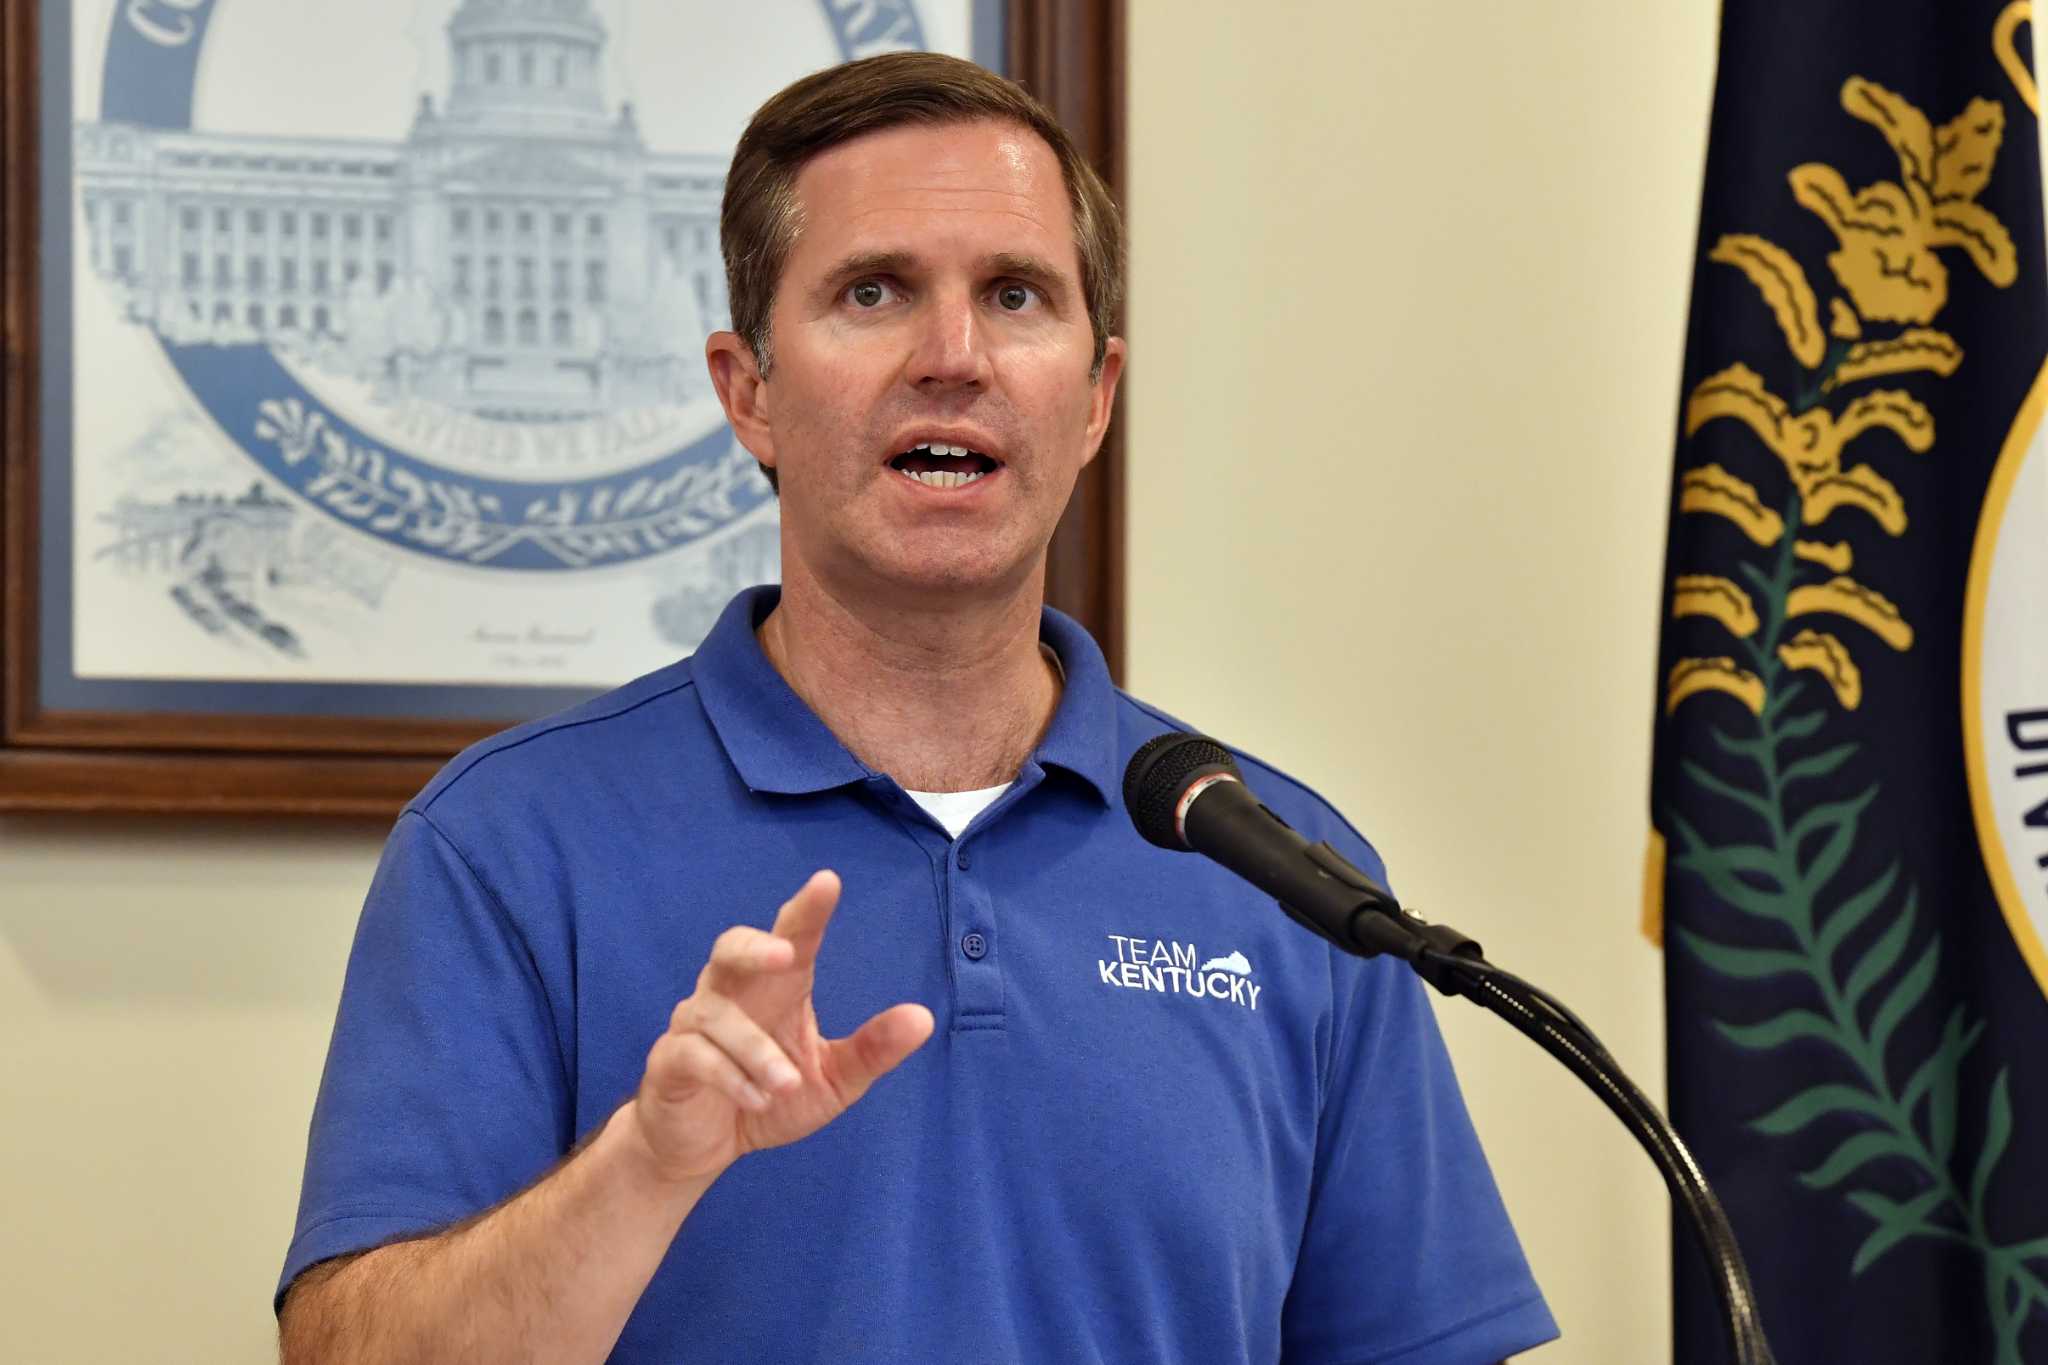 Kentucky Republicans ridicule Beshear's efforts to land spot on national Democratic ticket